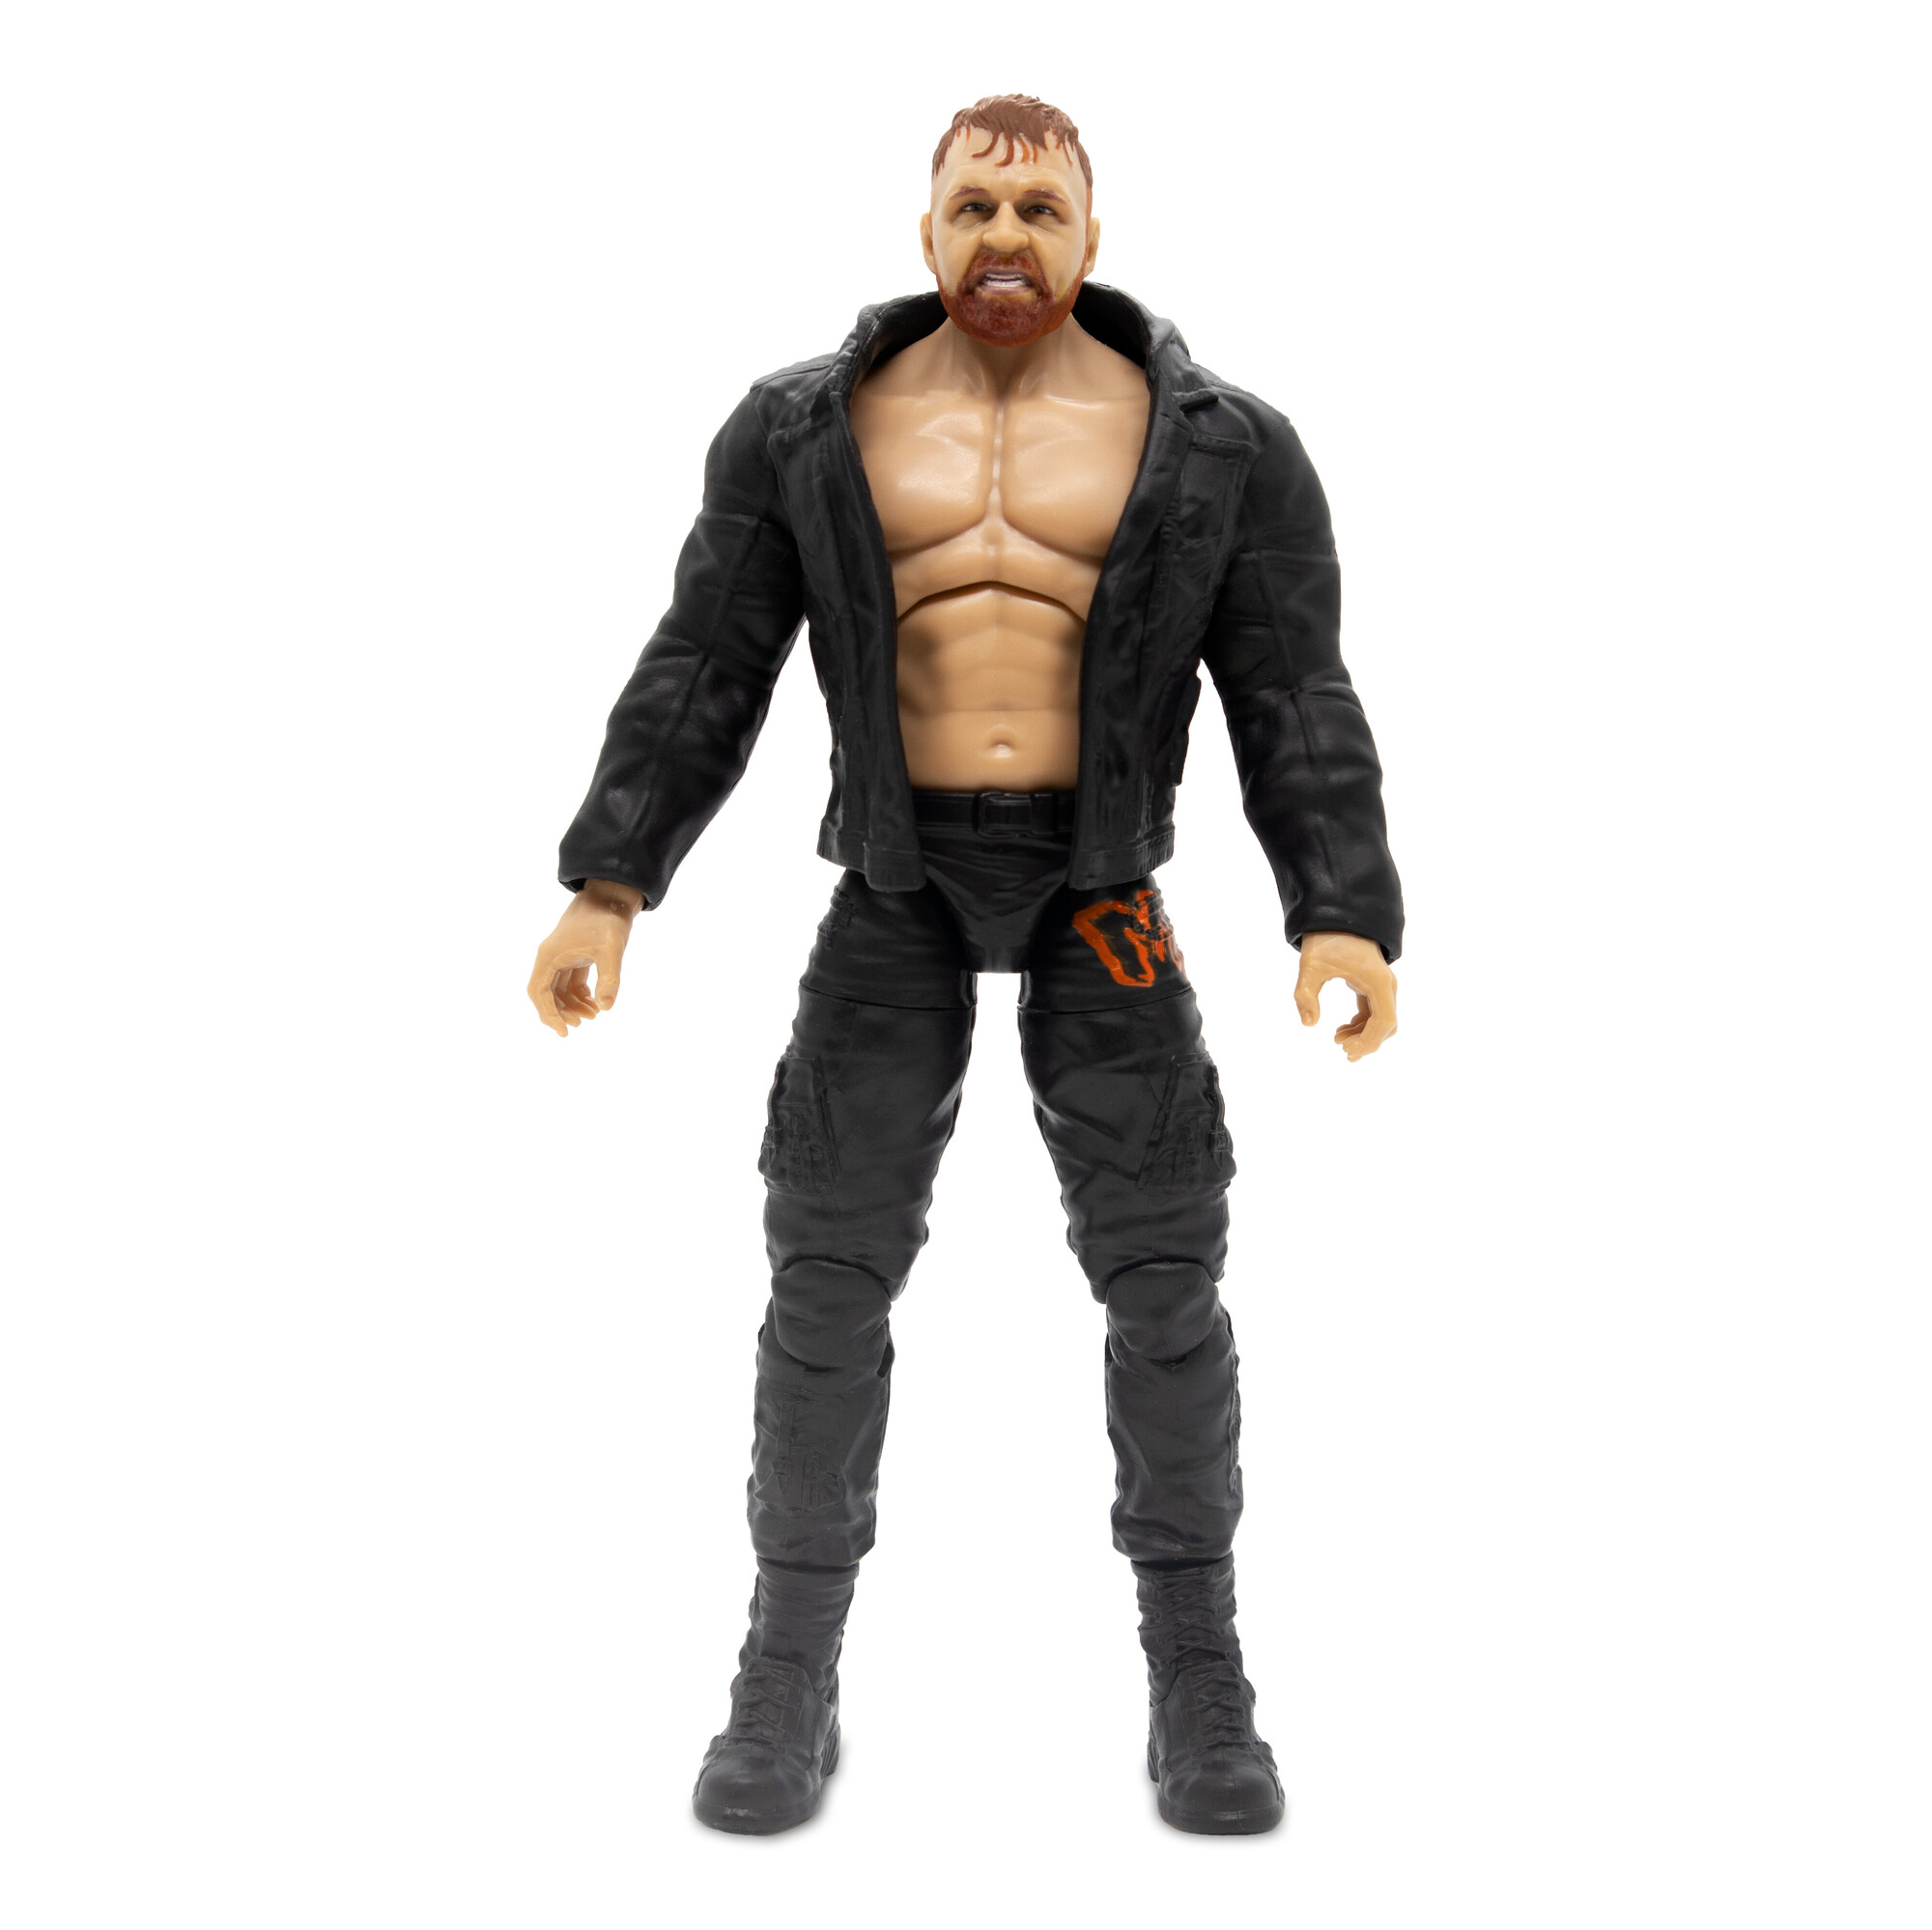 AEW All Elite Wrestling Unrivaled Collection Series 8 Jon Moxley Action Figure - image 5 of 5